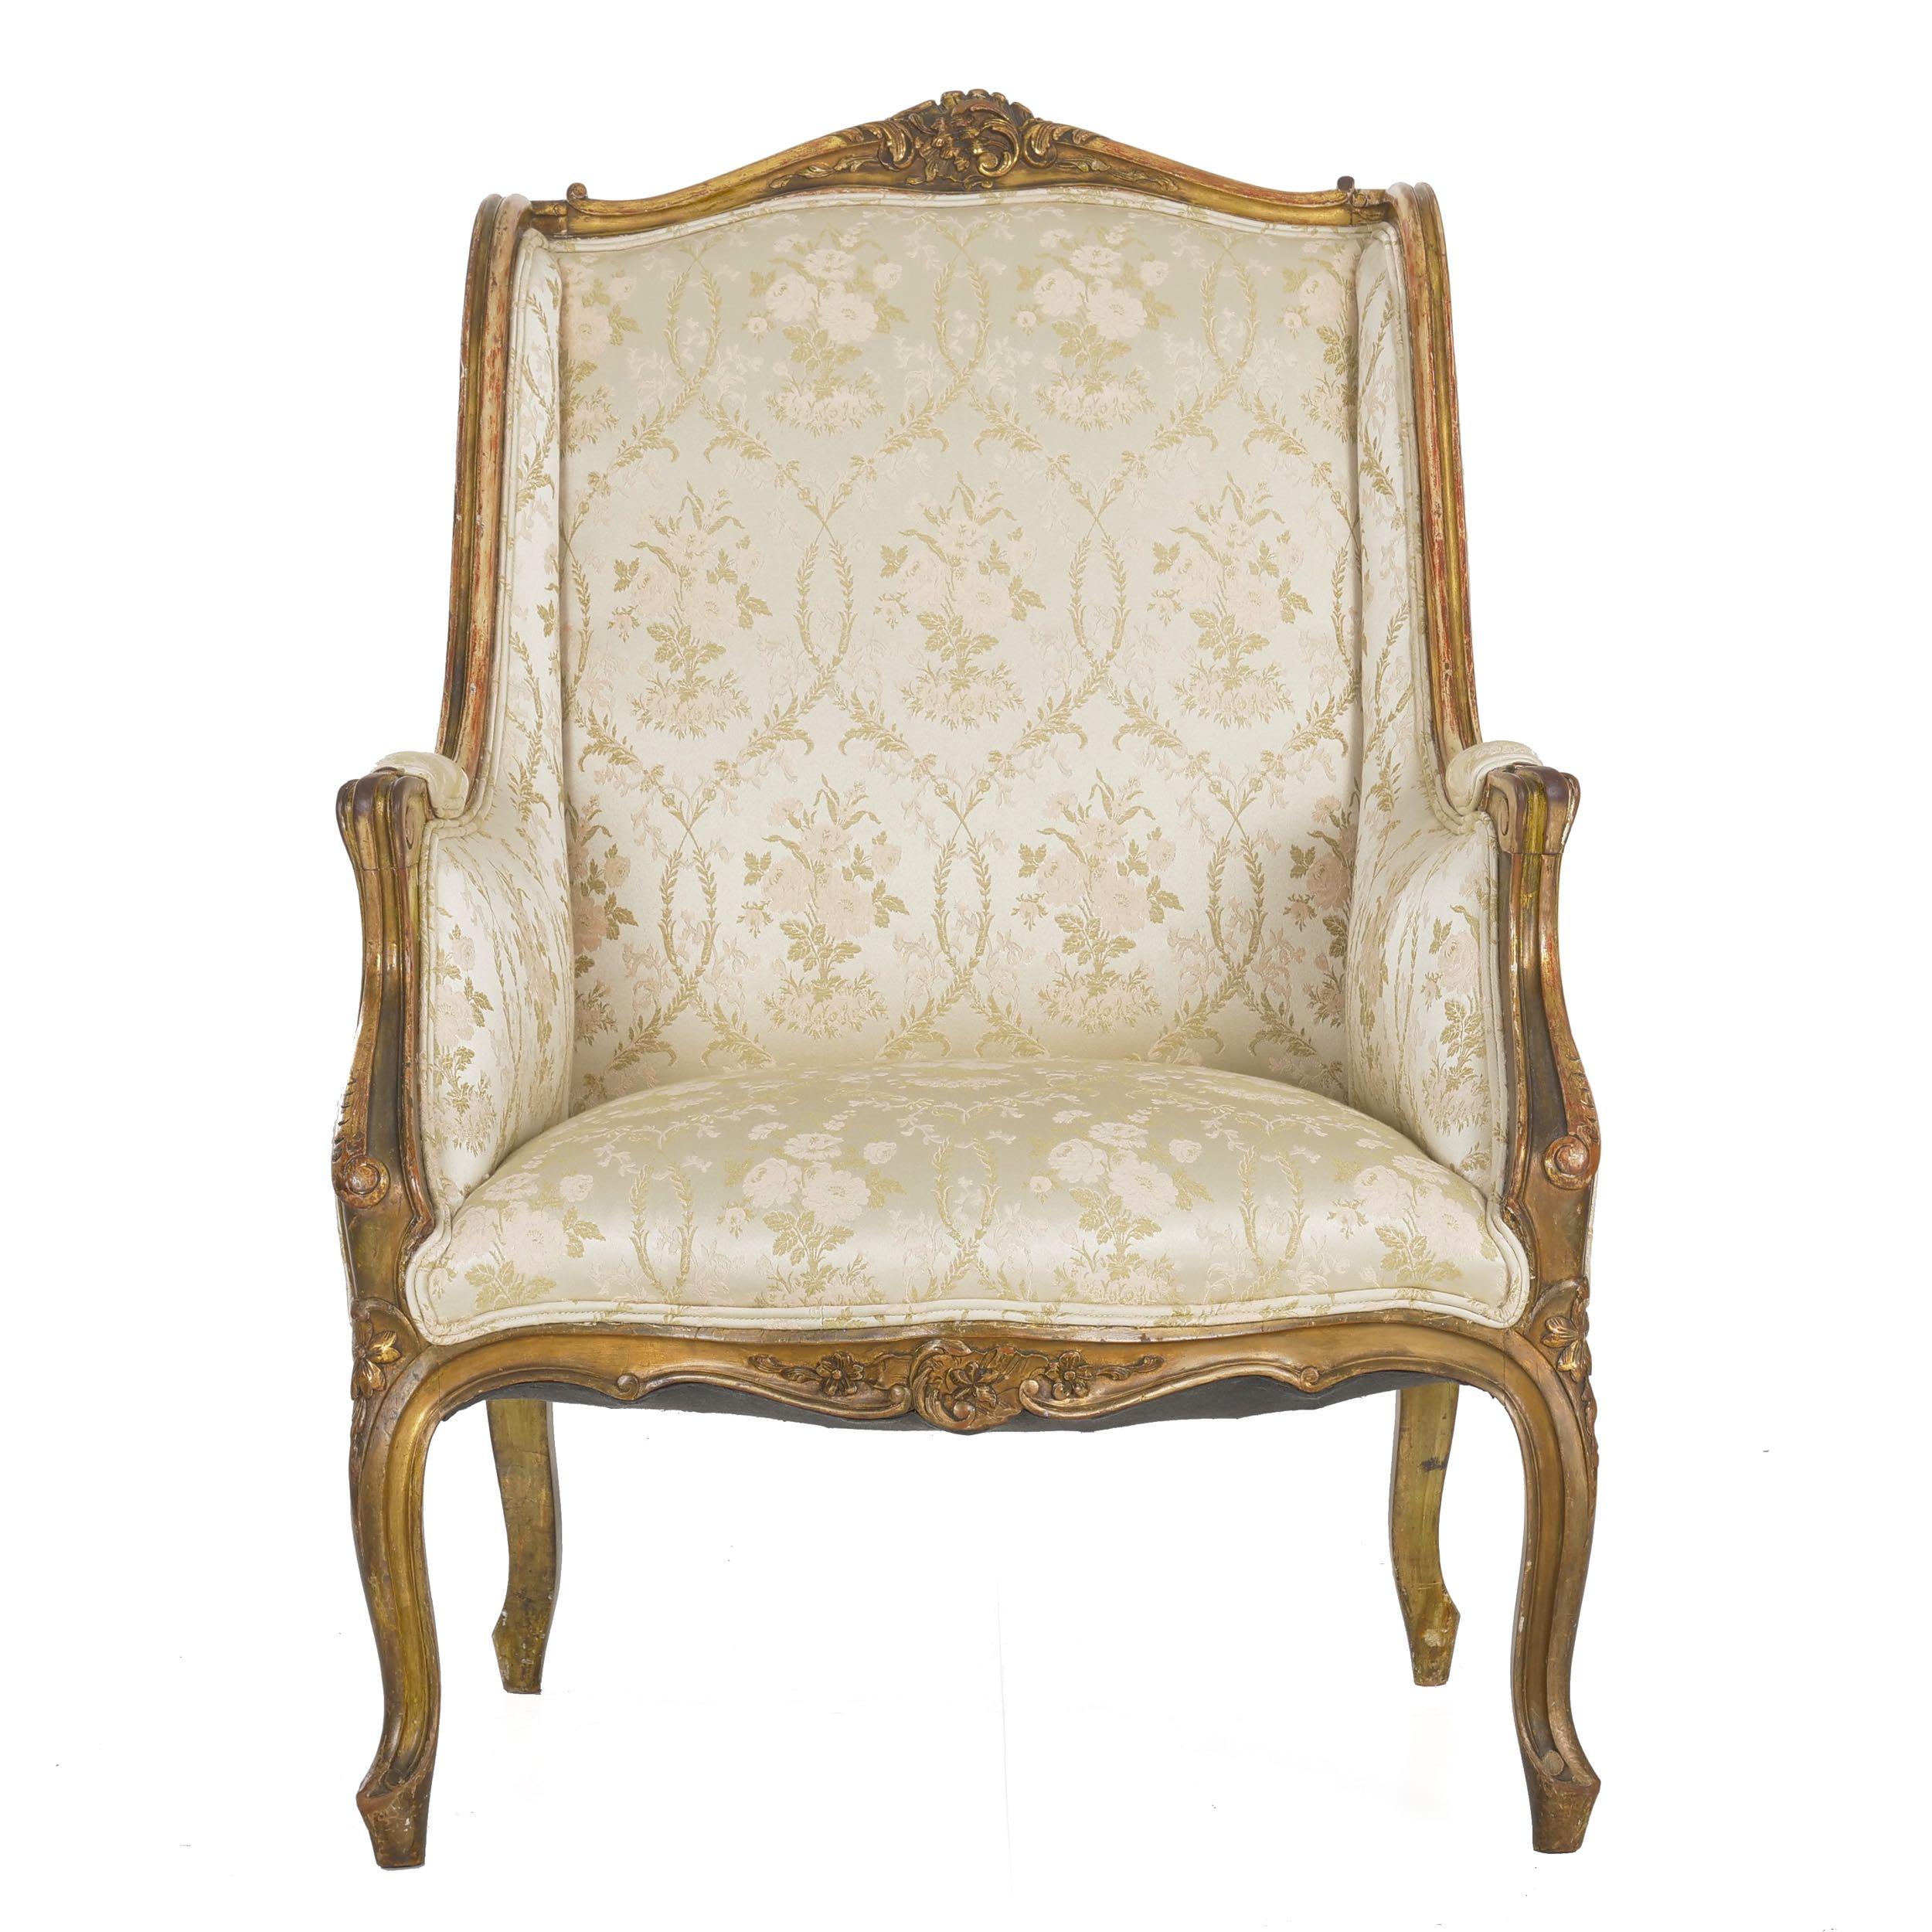 French Louis XV style polychrome and carved wingback bergère,
circa late 19th century
Item # 007SRV30P 

The rich polychrome surface of this wingback bergère armchair is perhaps what makes it so attractive, the numerous layers of old paint and